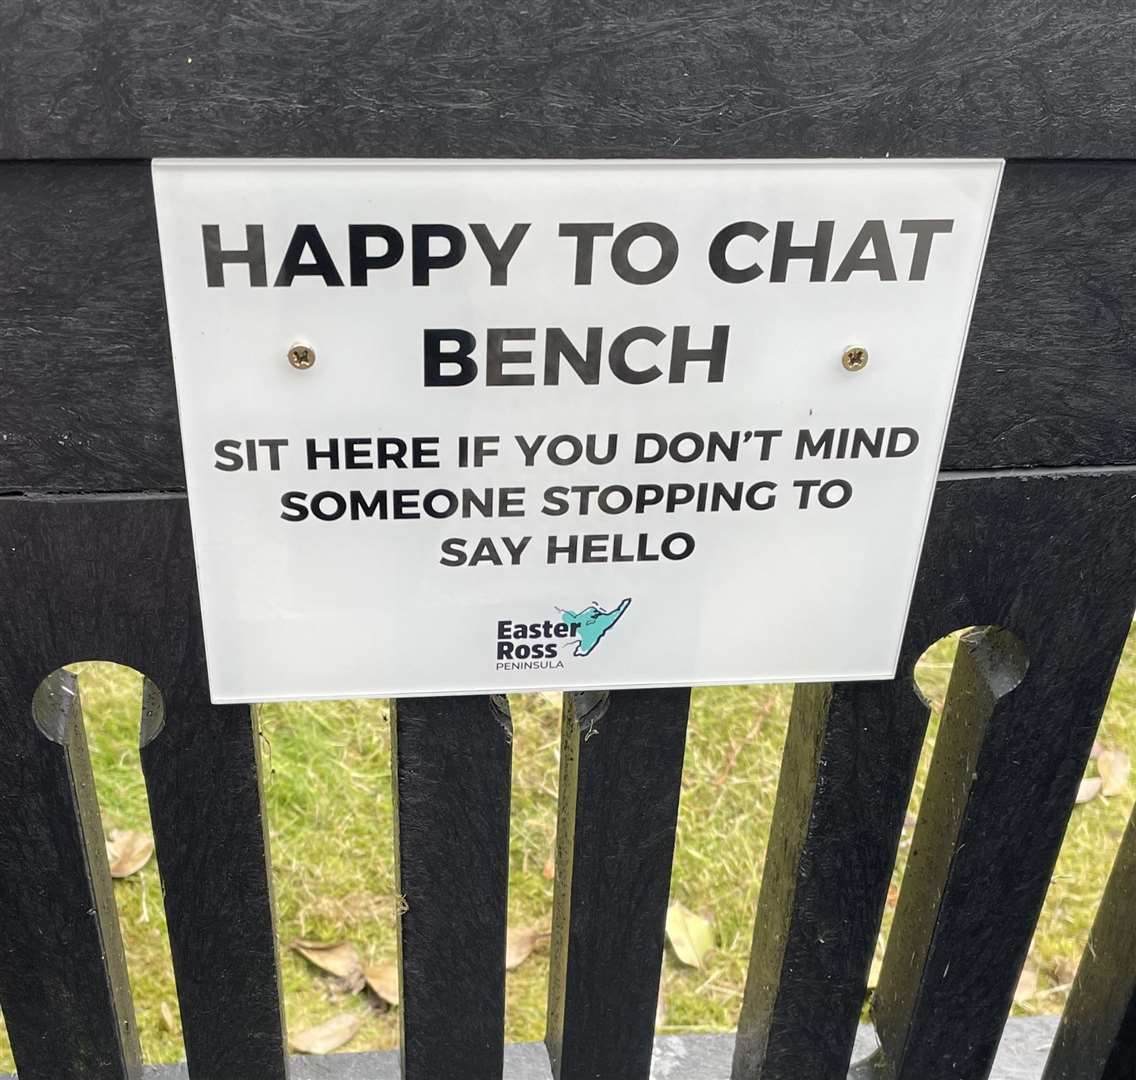 The bench in Tain